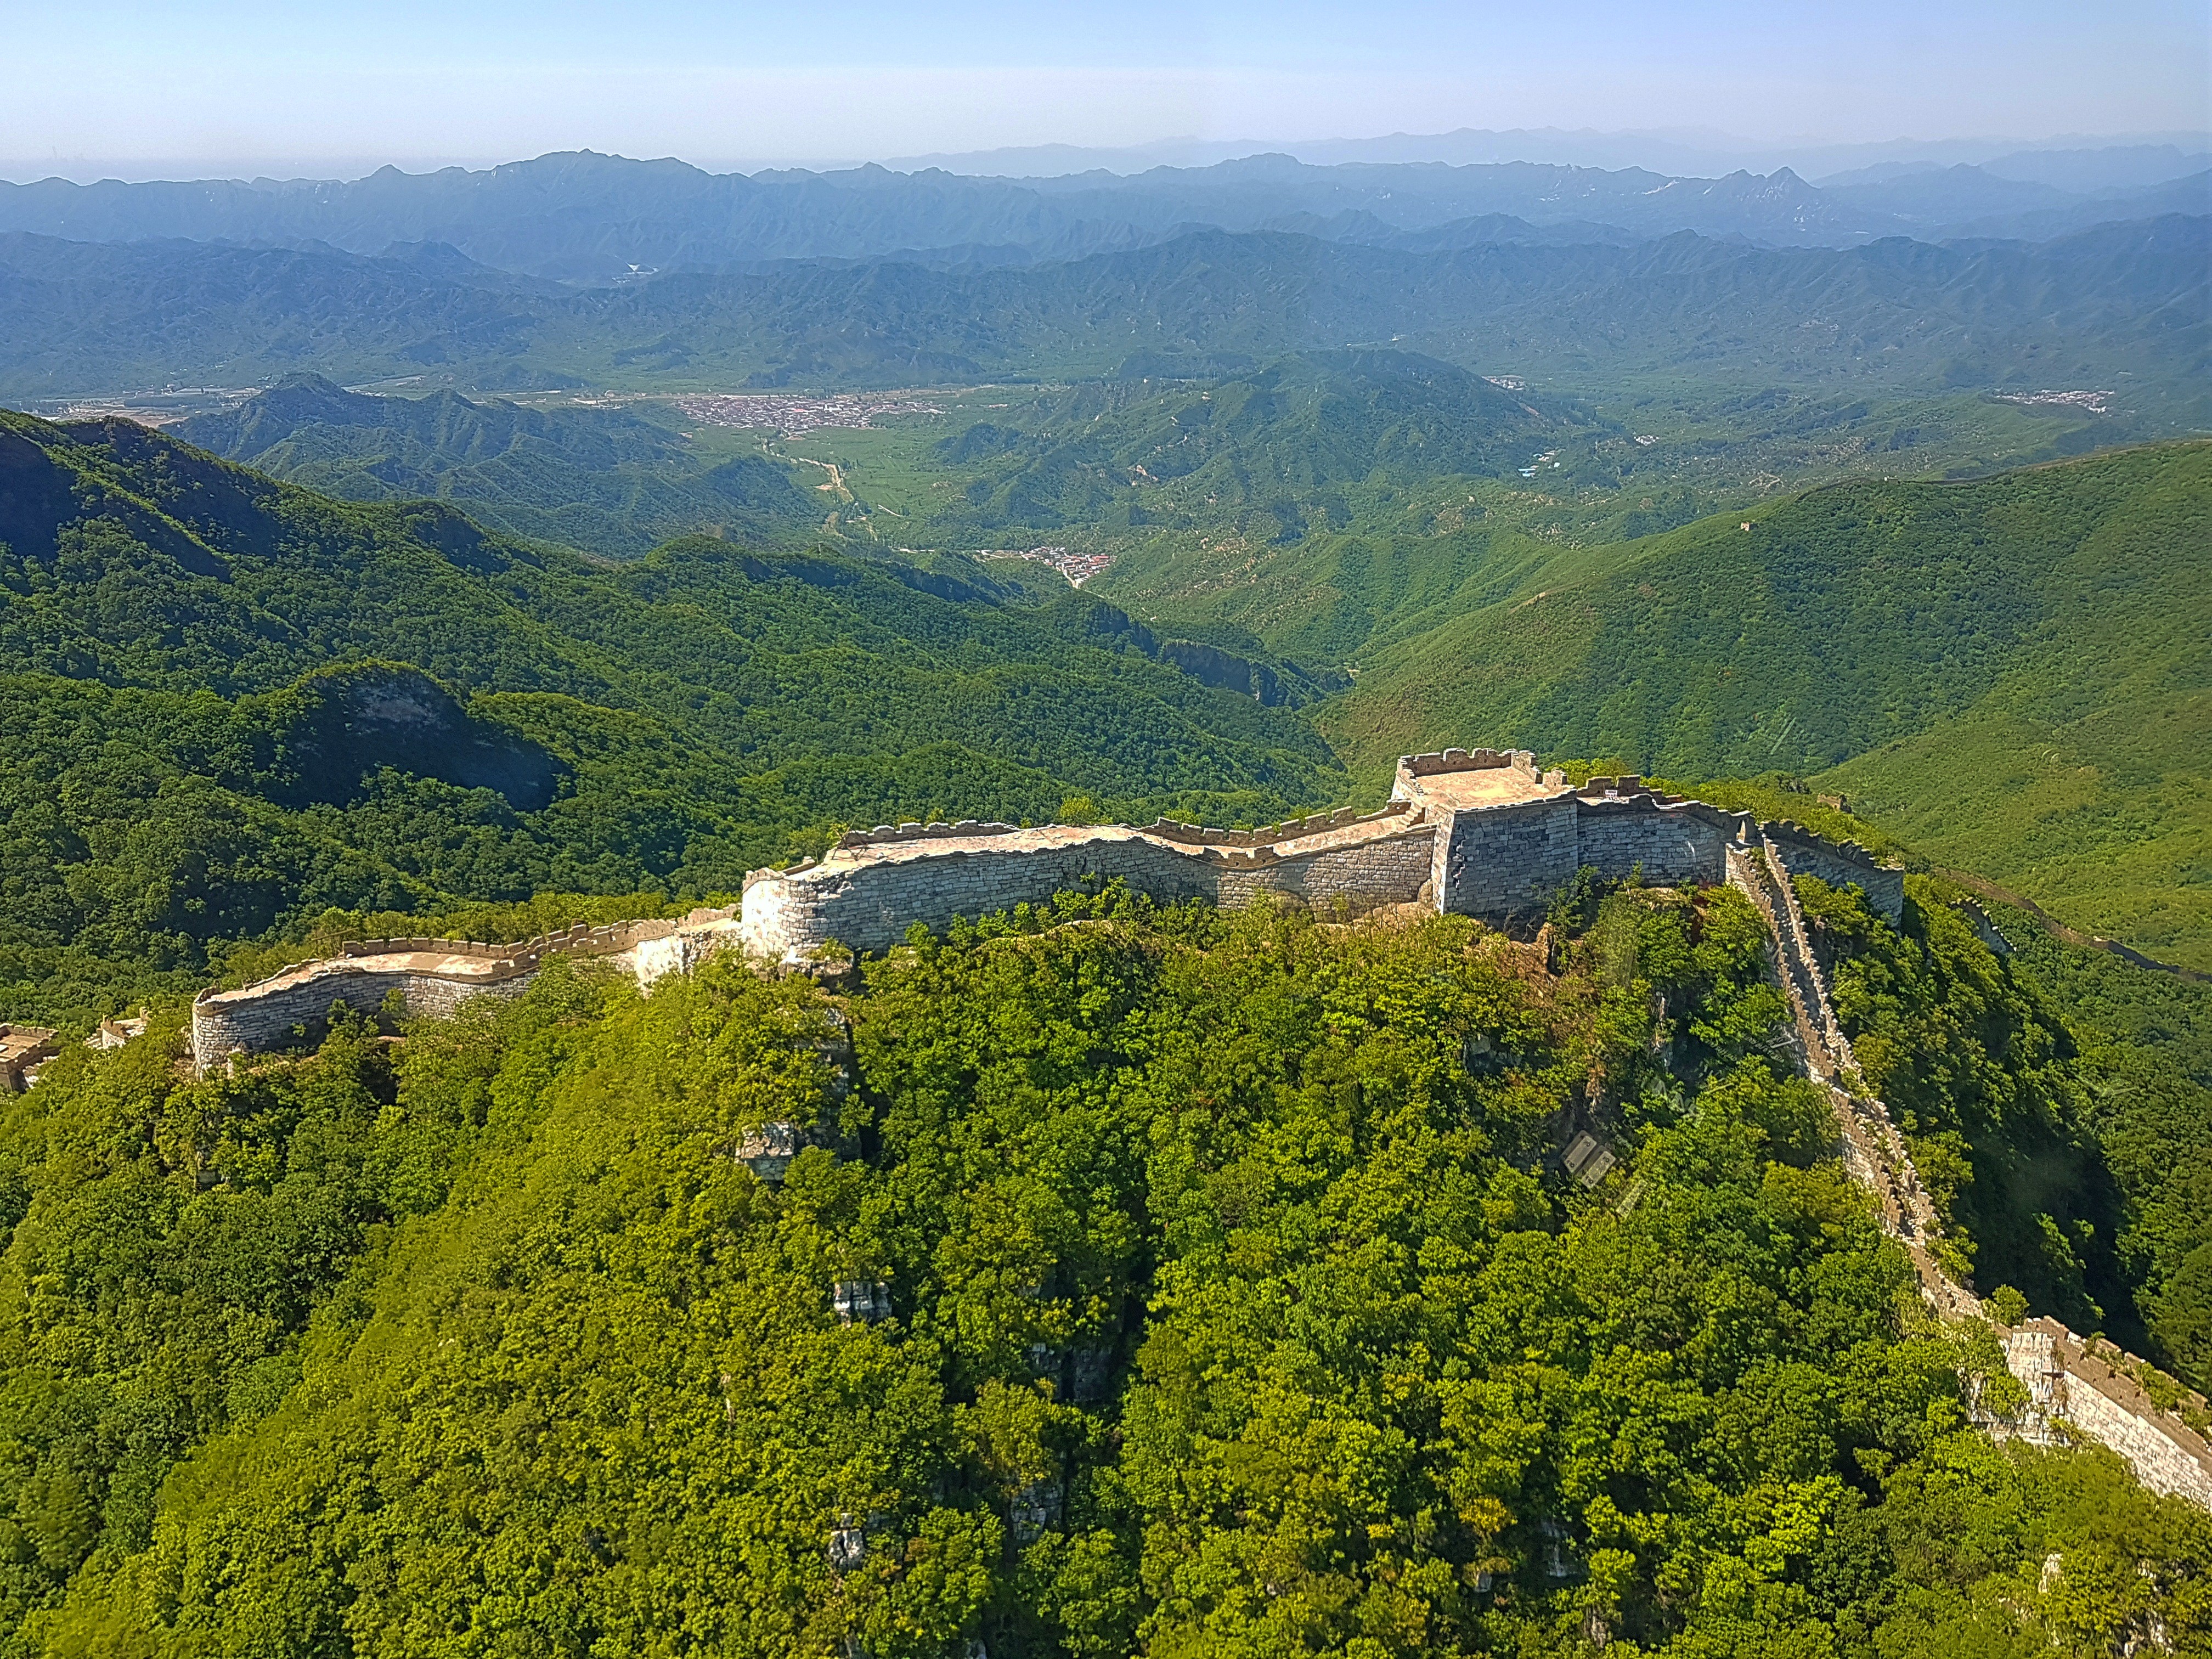 The Four Seasons Beijing can arrange for you to fly over the Great Wall at Mutianyu, which is inaccessible from the ground. Photos: Cedric Tan